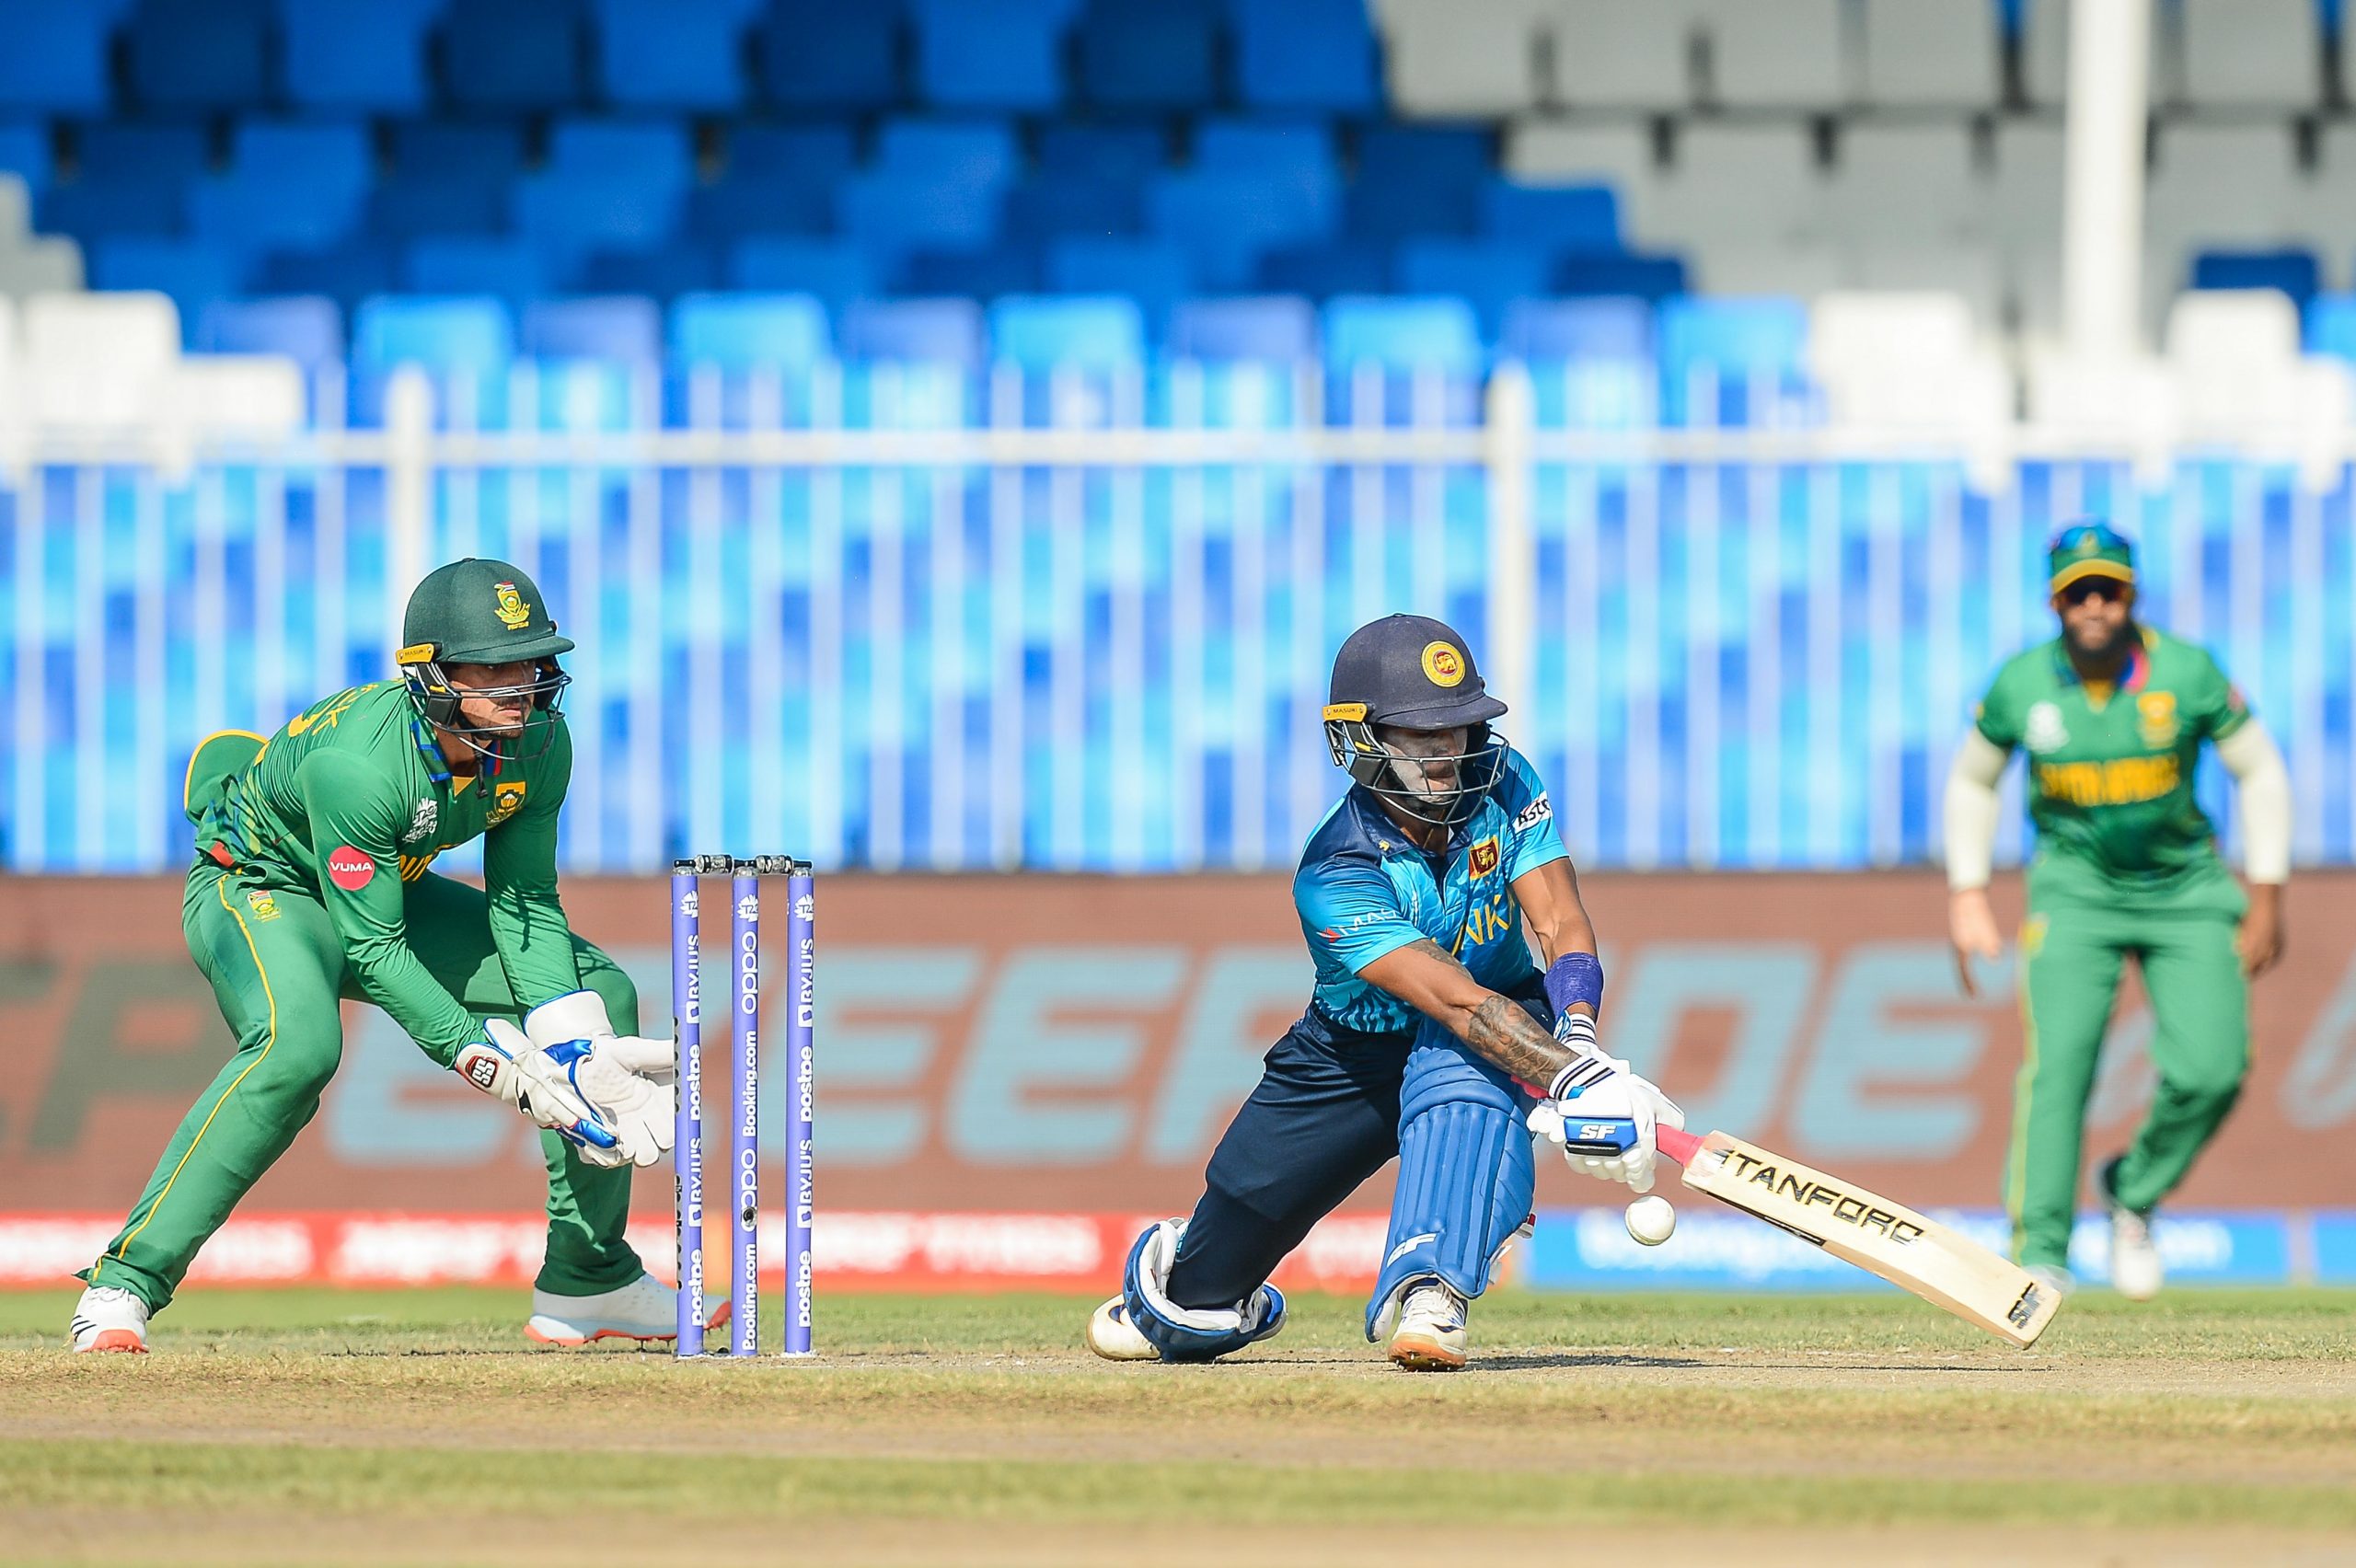 South Africa win by 4 wickets as run out indiscretion proves costly for Sri Lanka